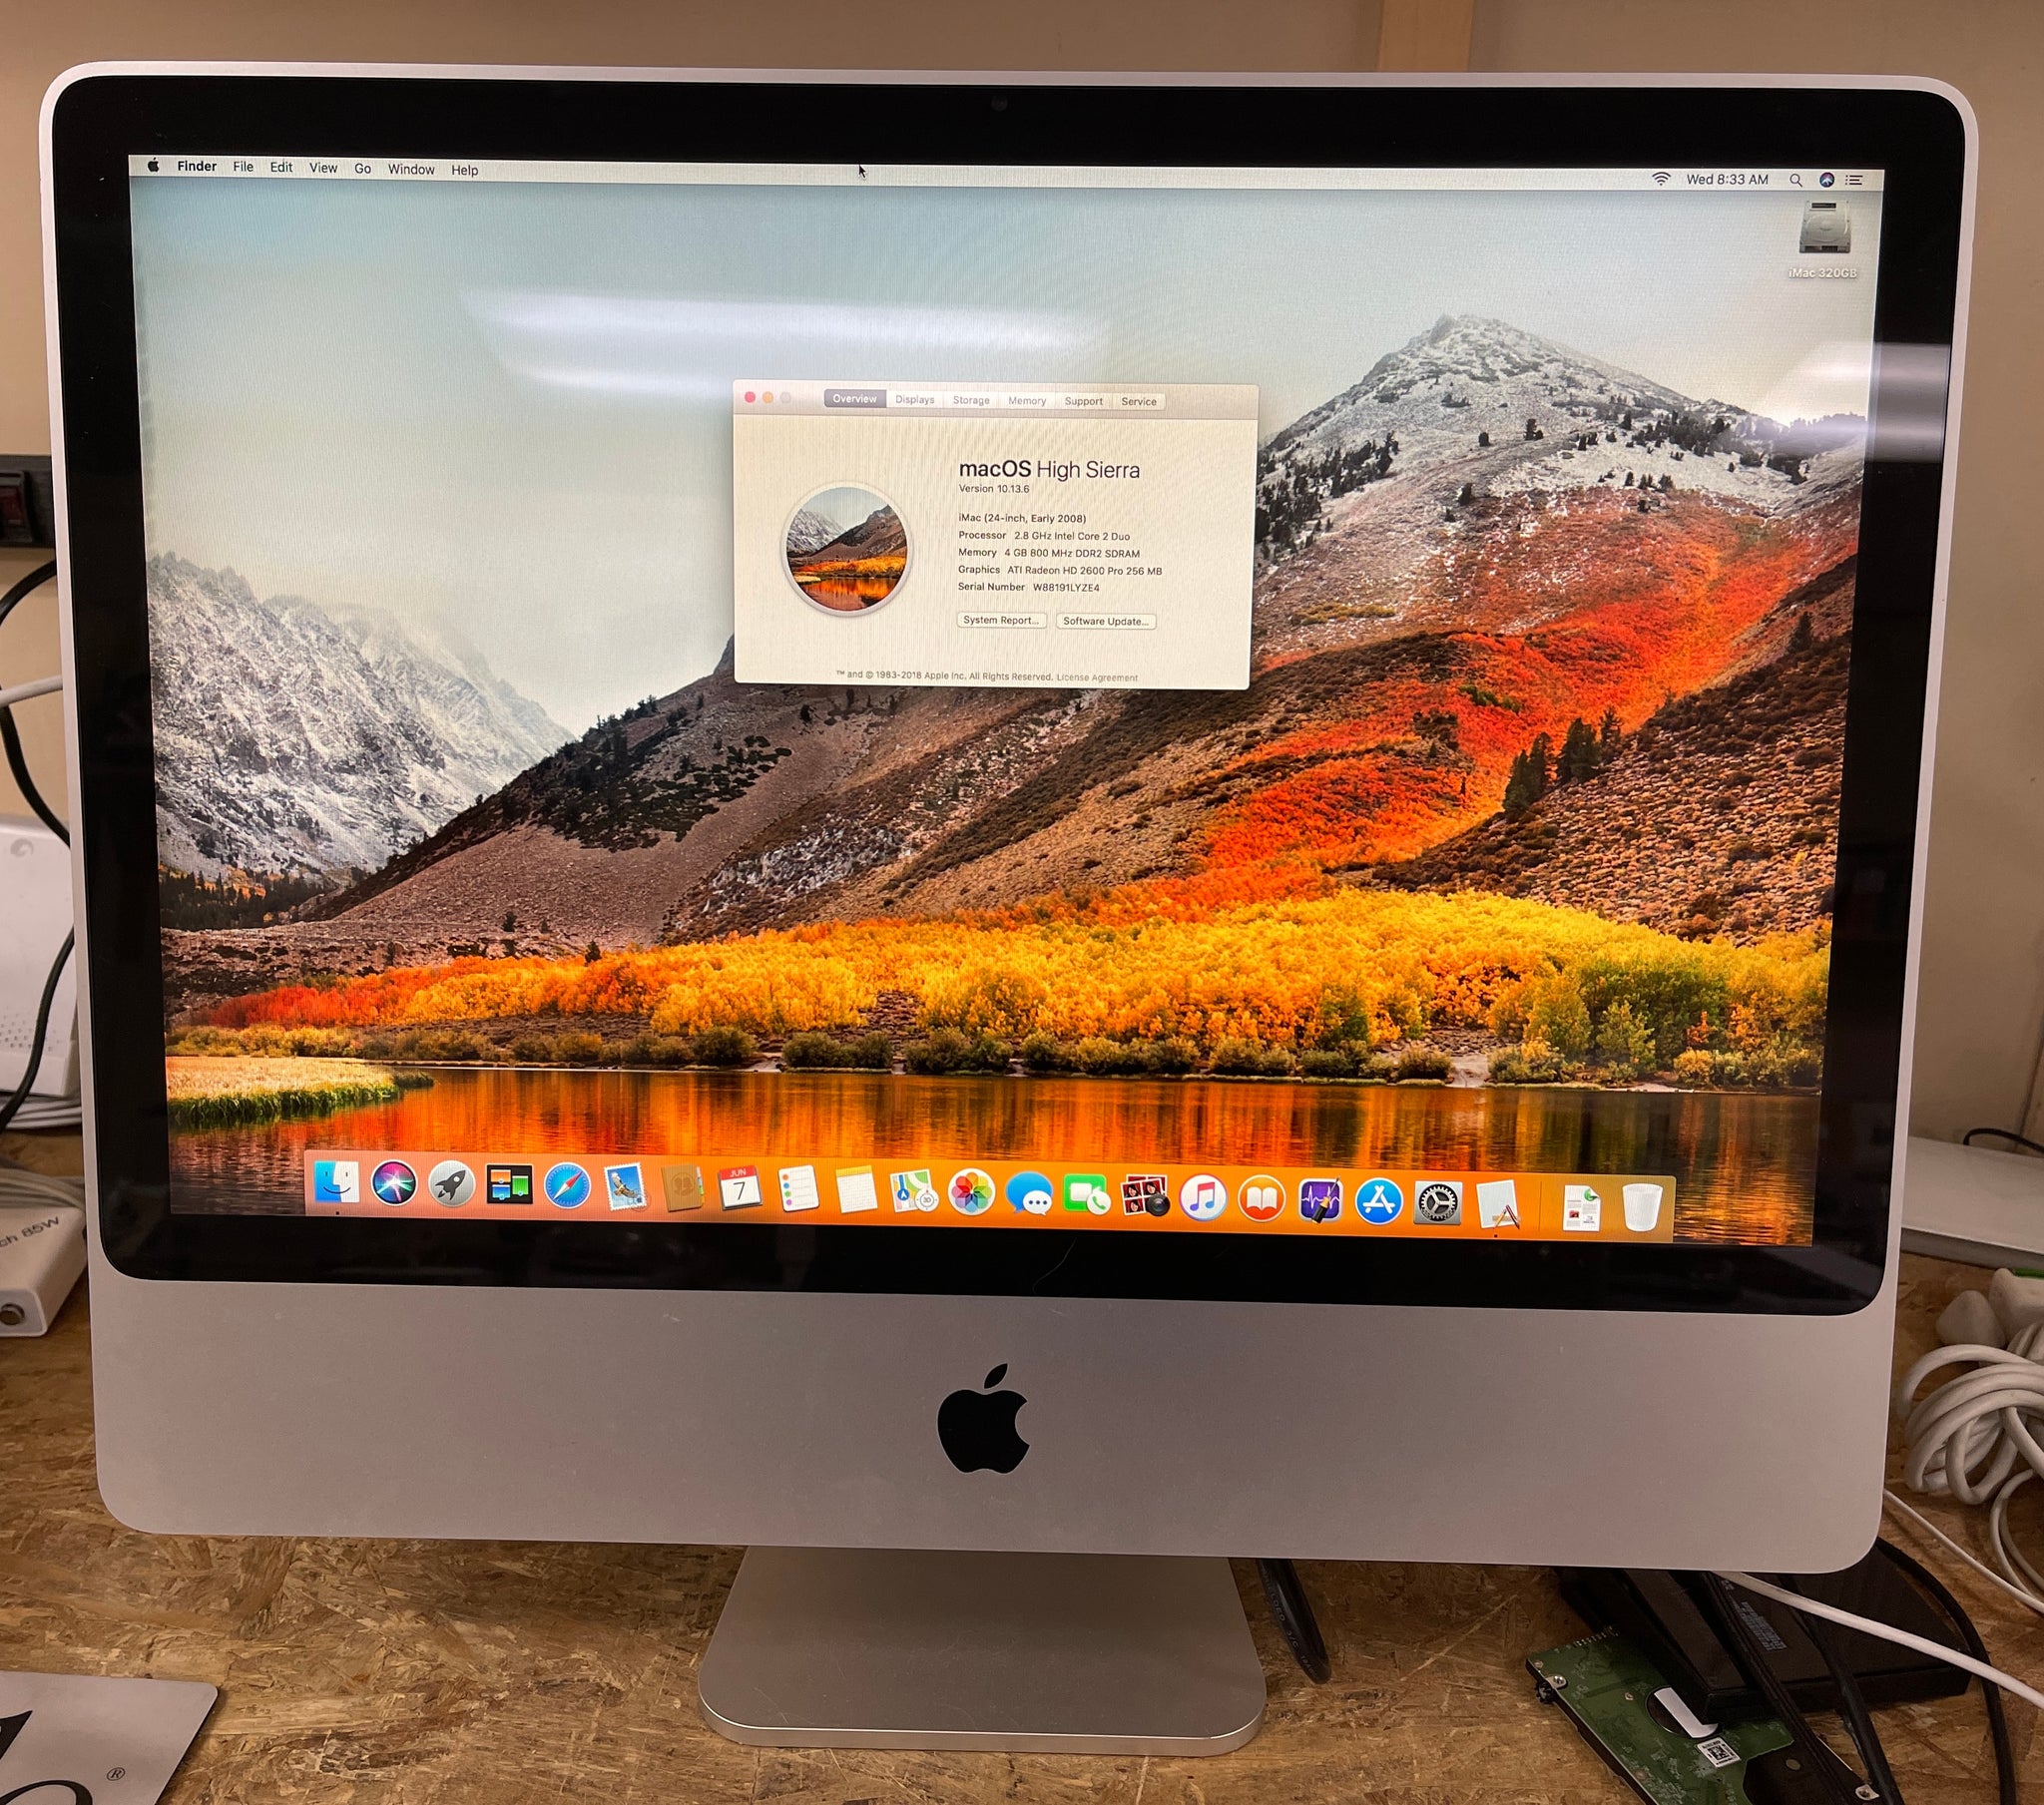 Apple iMac 24-inch Early 2008 2.8GHz Intel Core 2 Duo (MB325LL/A